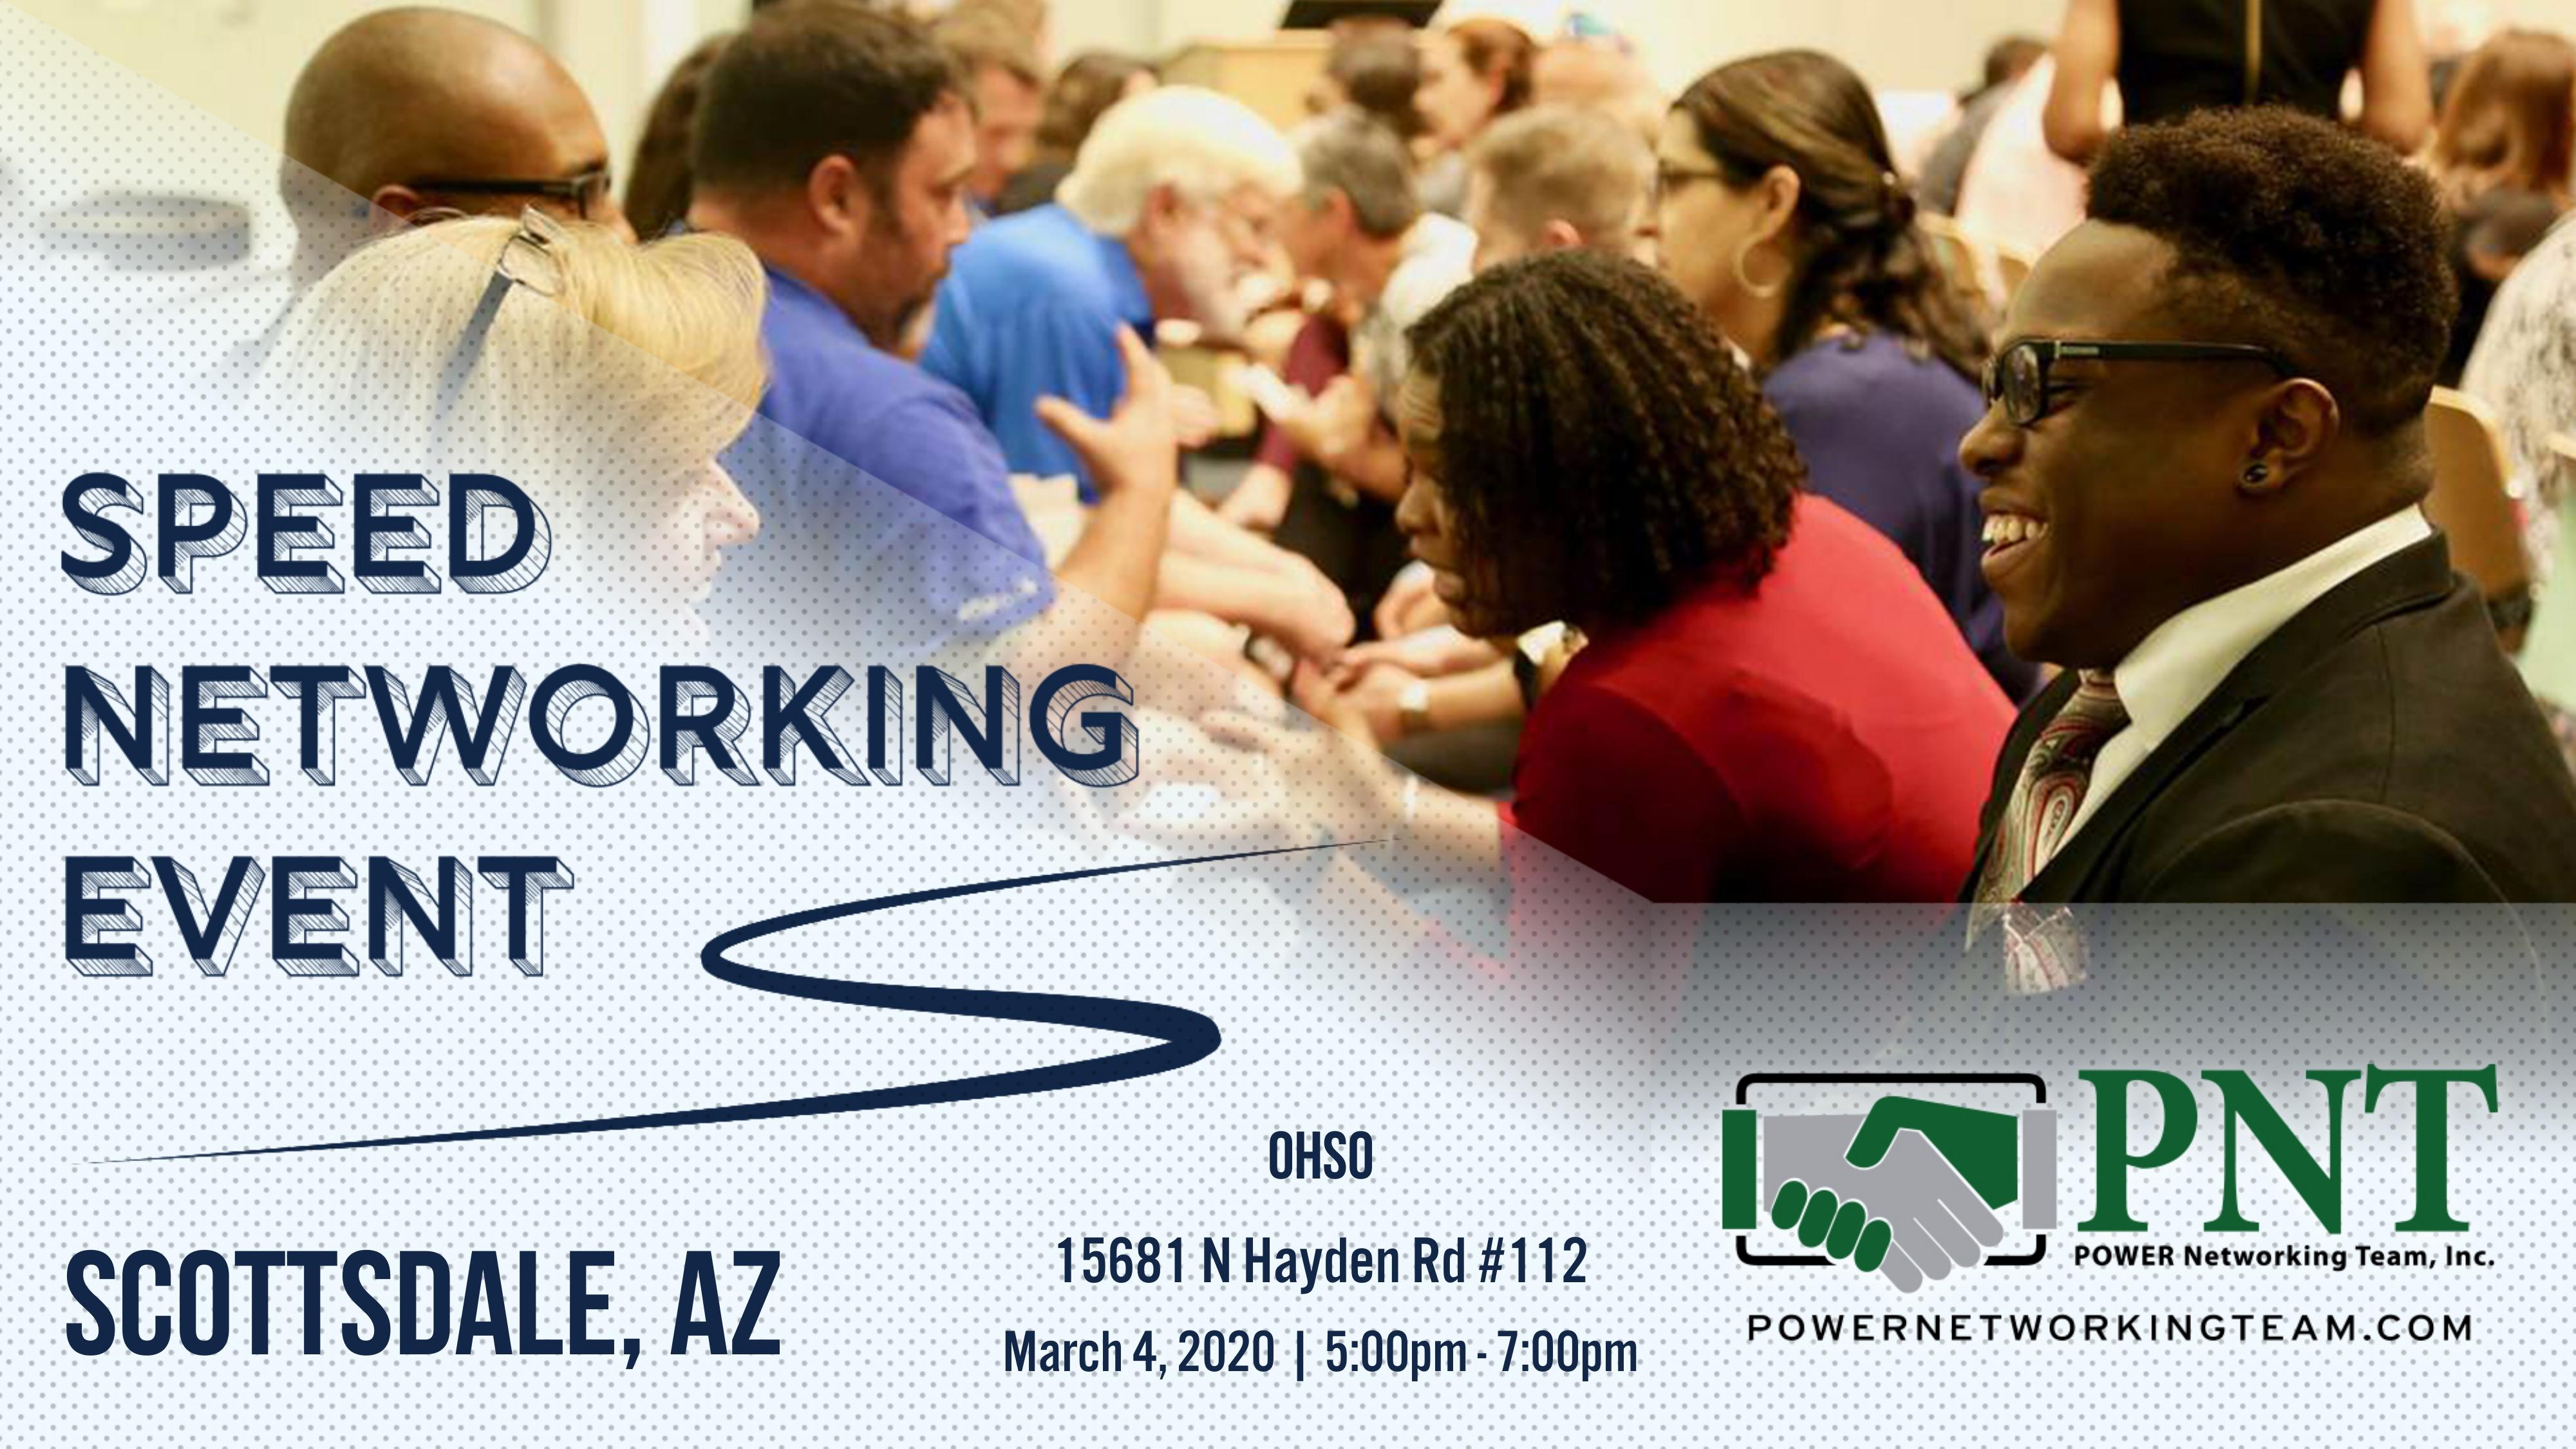 03/04/20 - PNT Scottsdale Chapters - Small Business Speed Networking Event